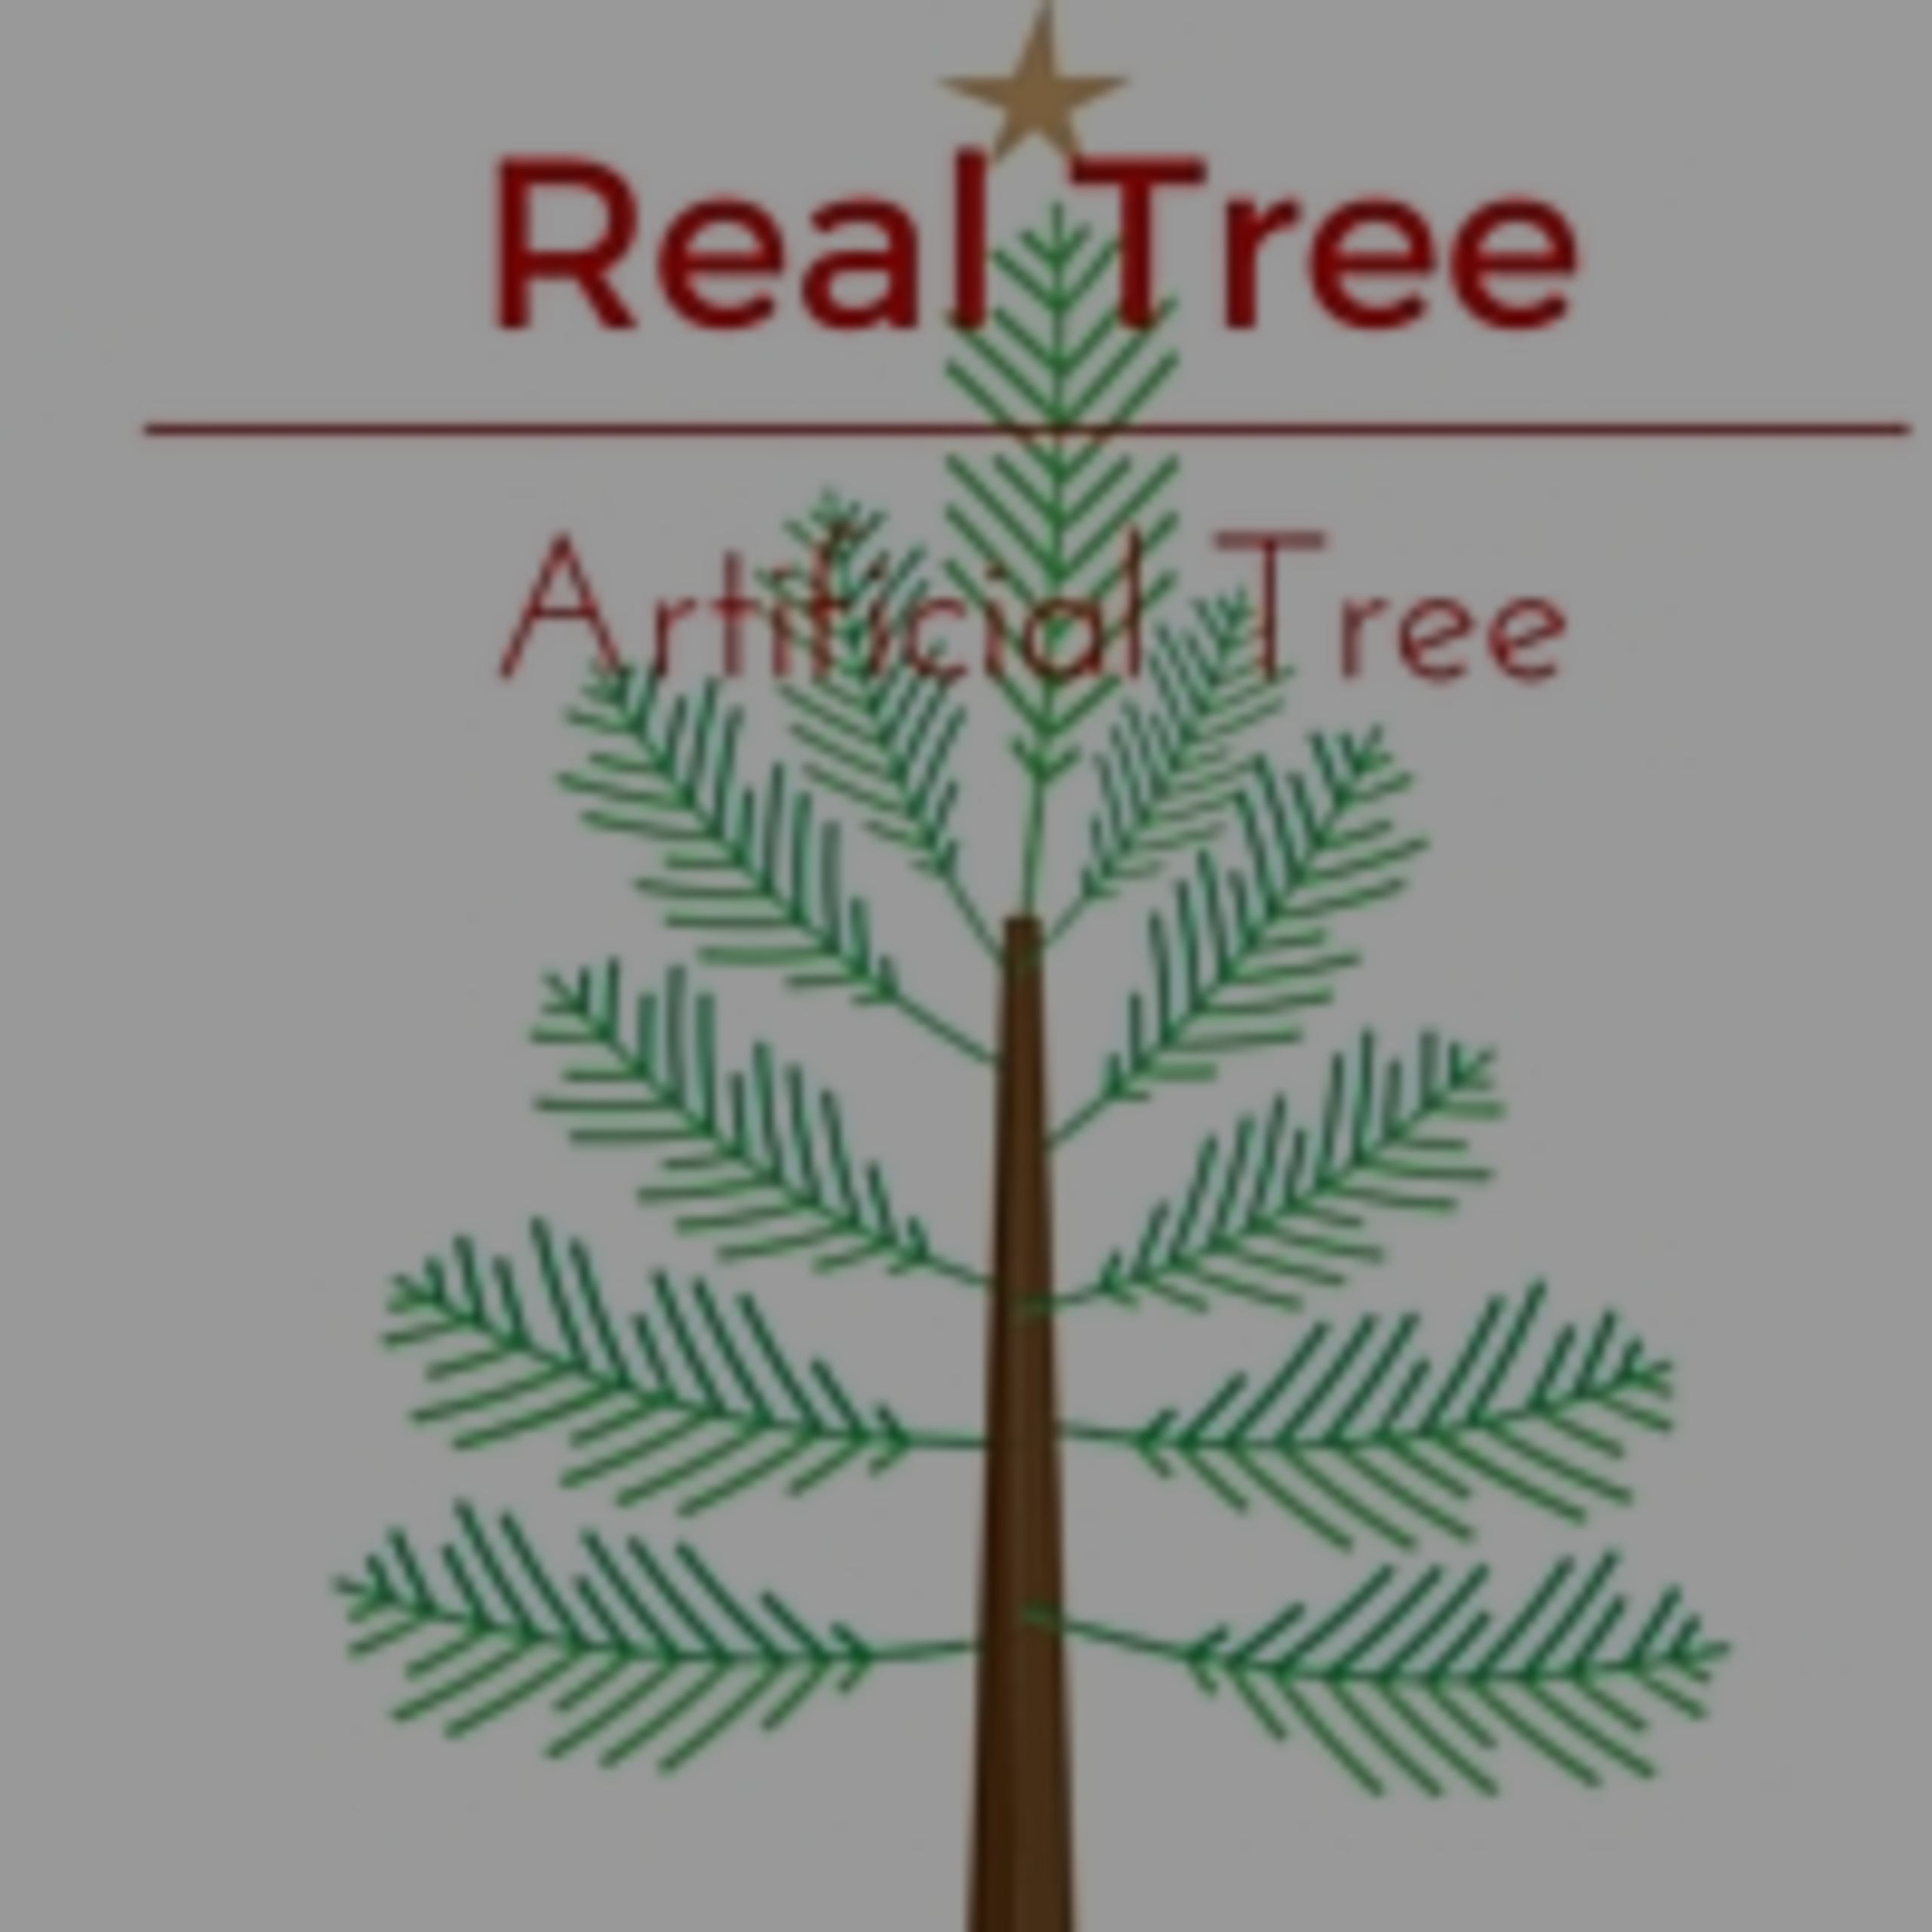 Real Christmas Trees vs. Fake Christmas Trees: Which are Greener?